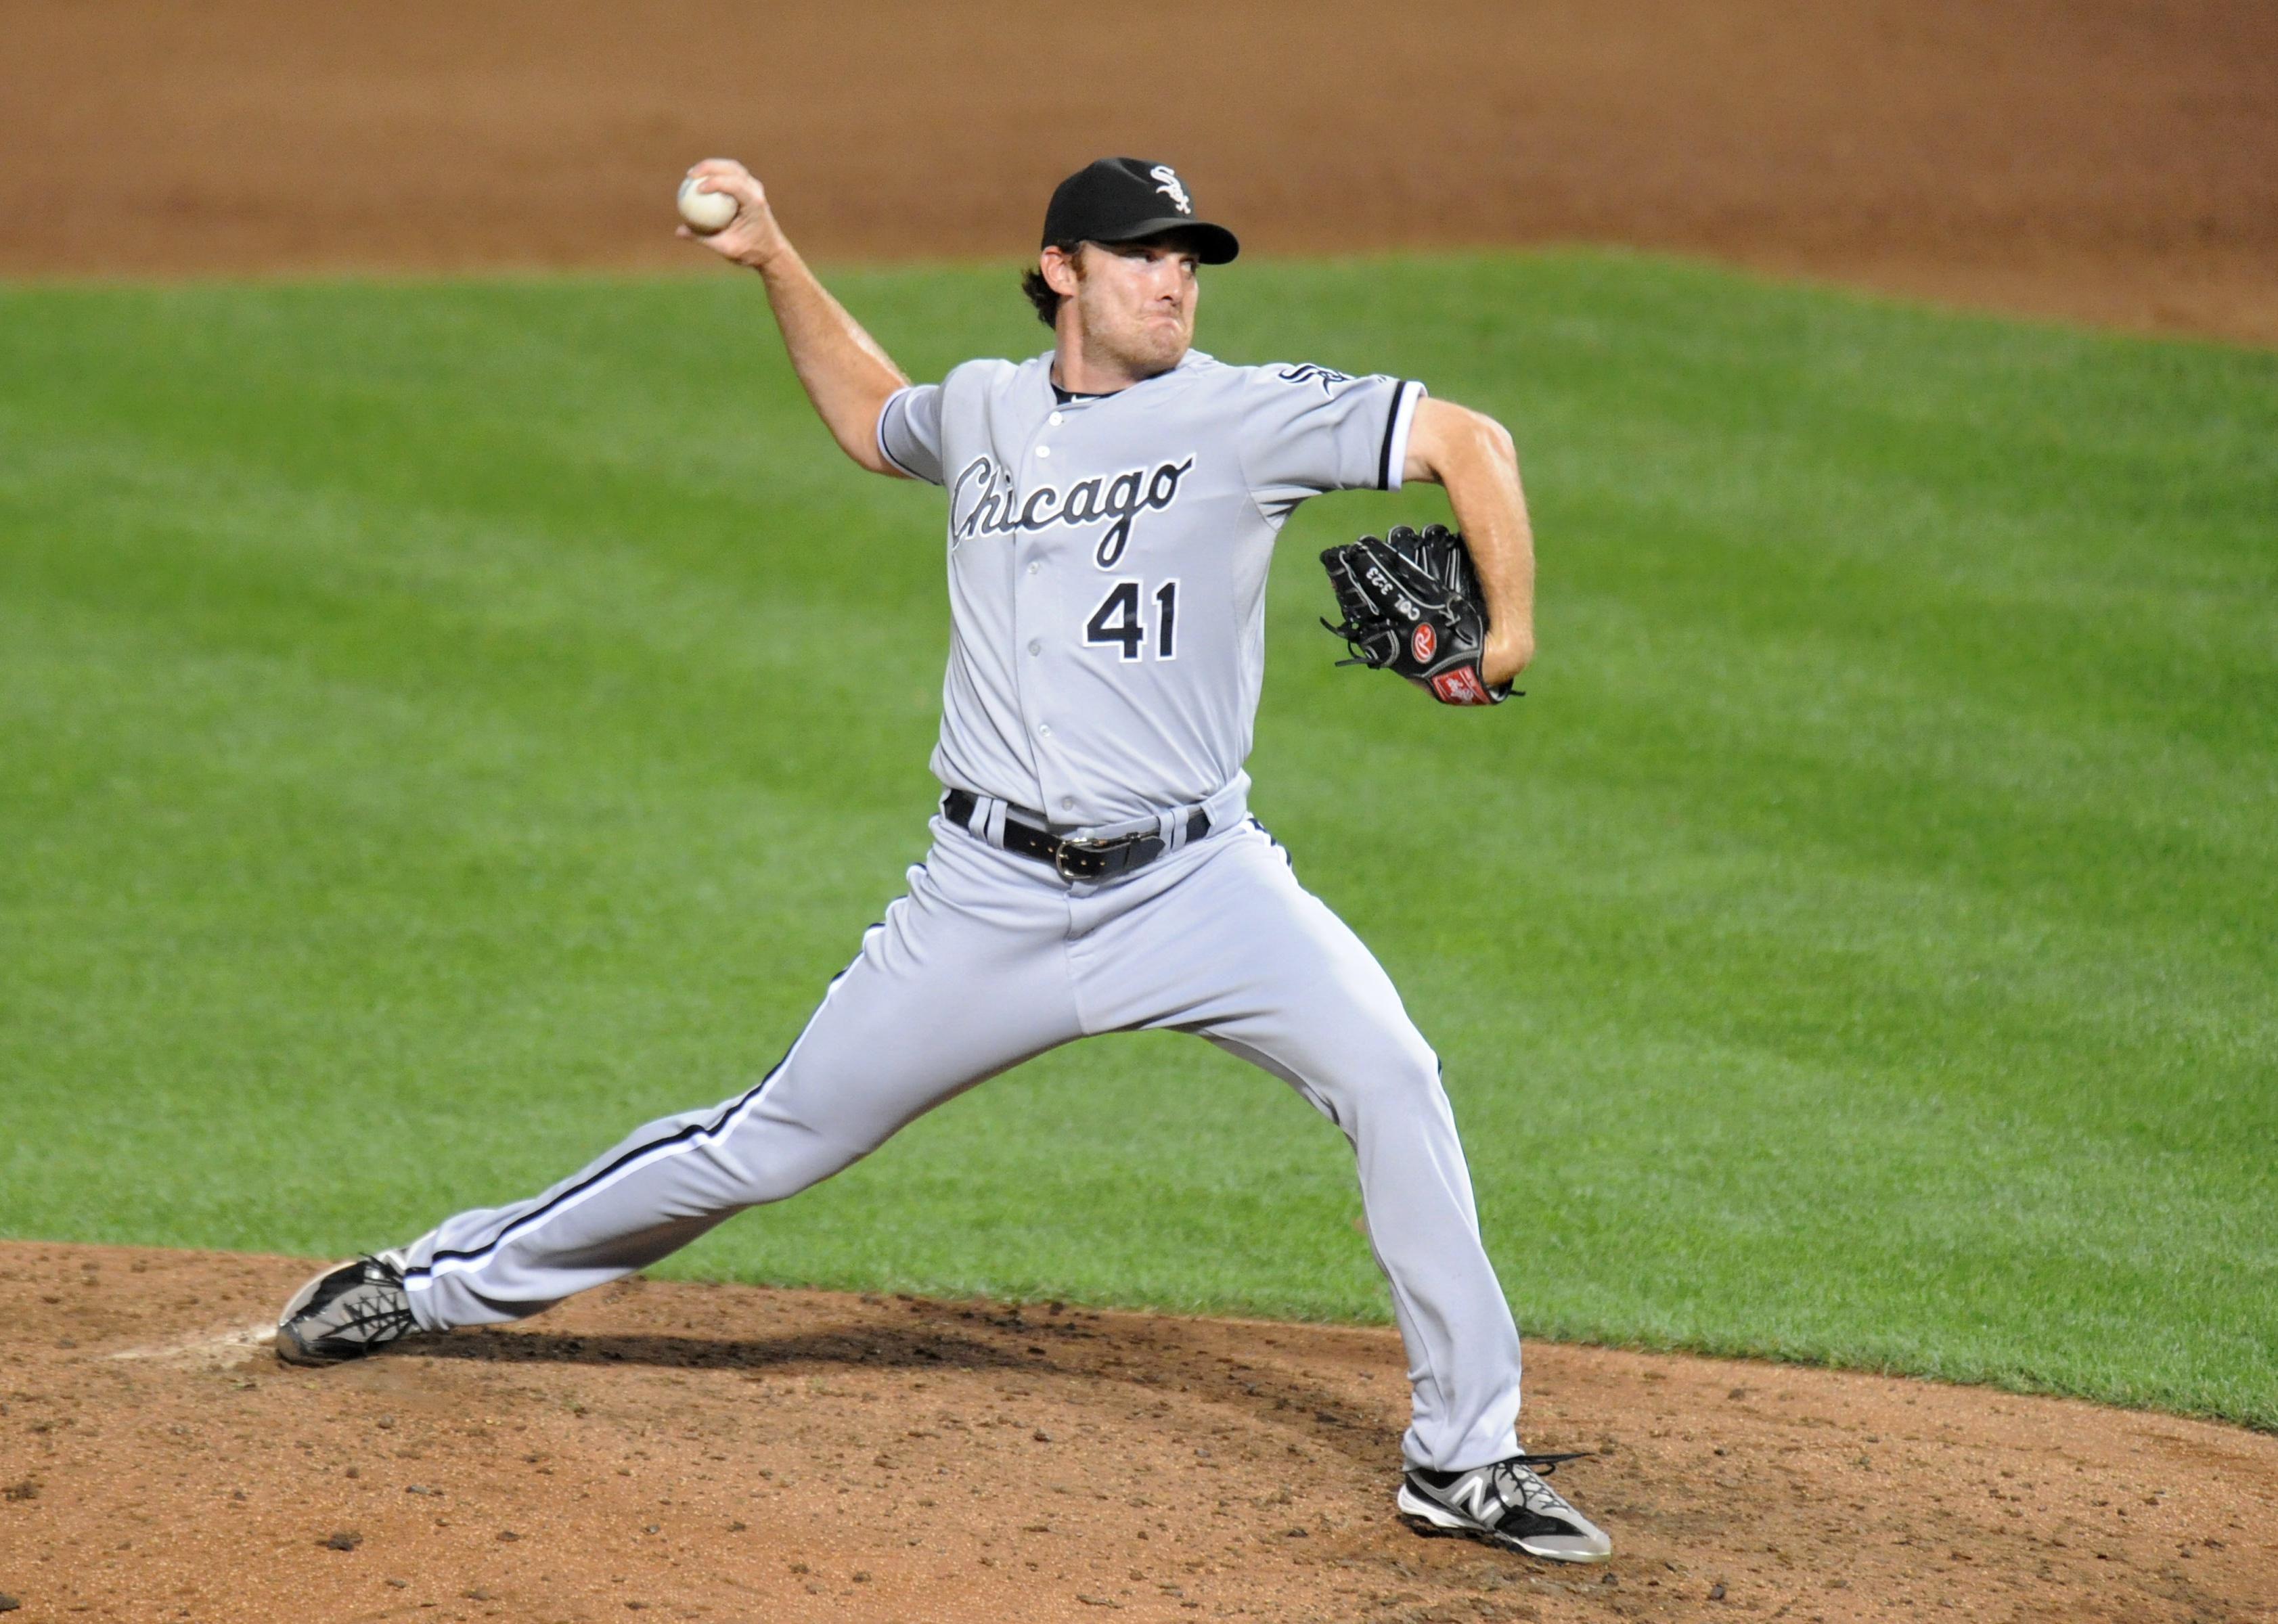 Philip Humber of the Chicago White Sox pitches during a baseball game.